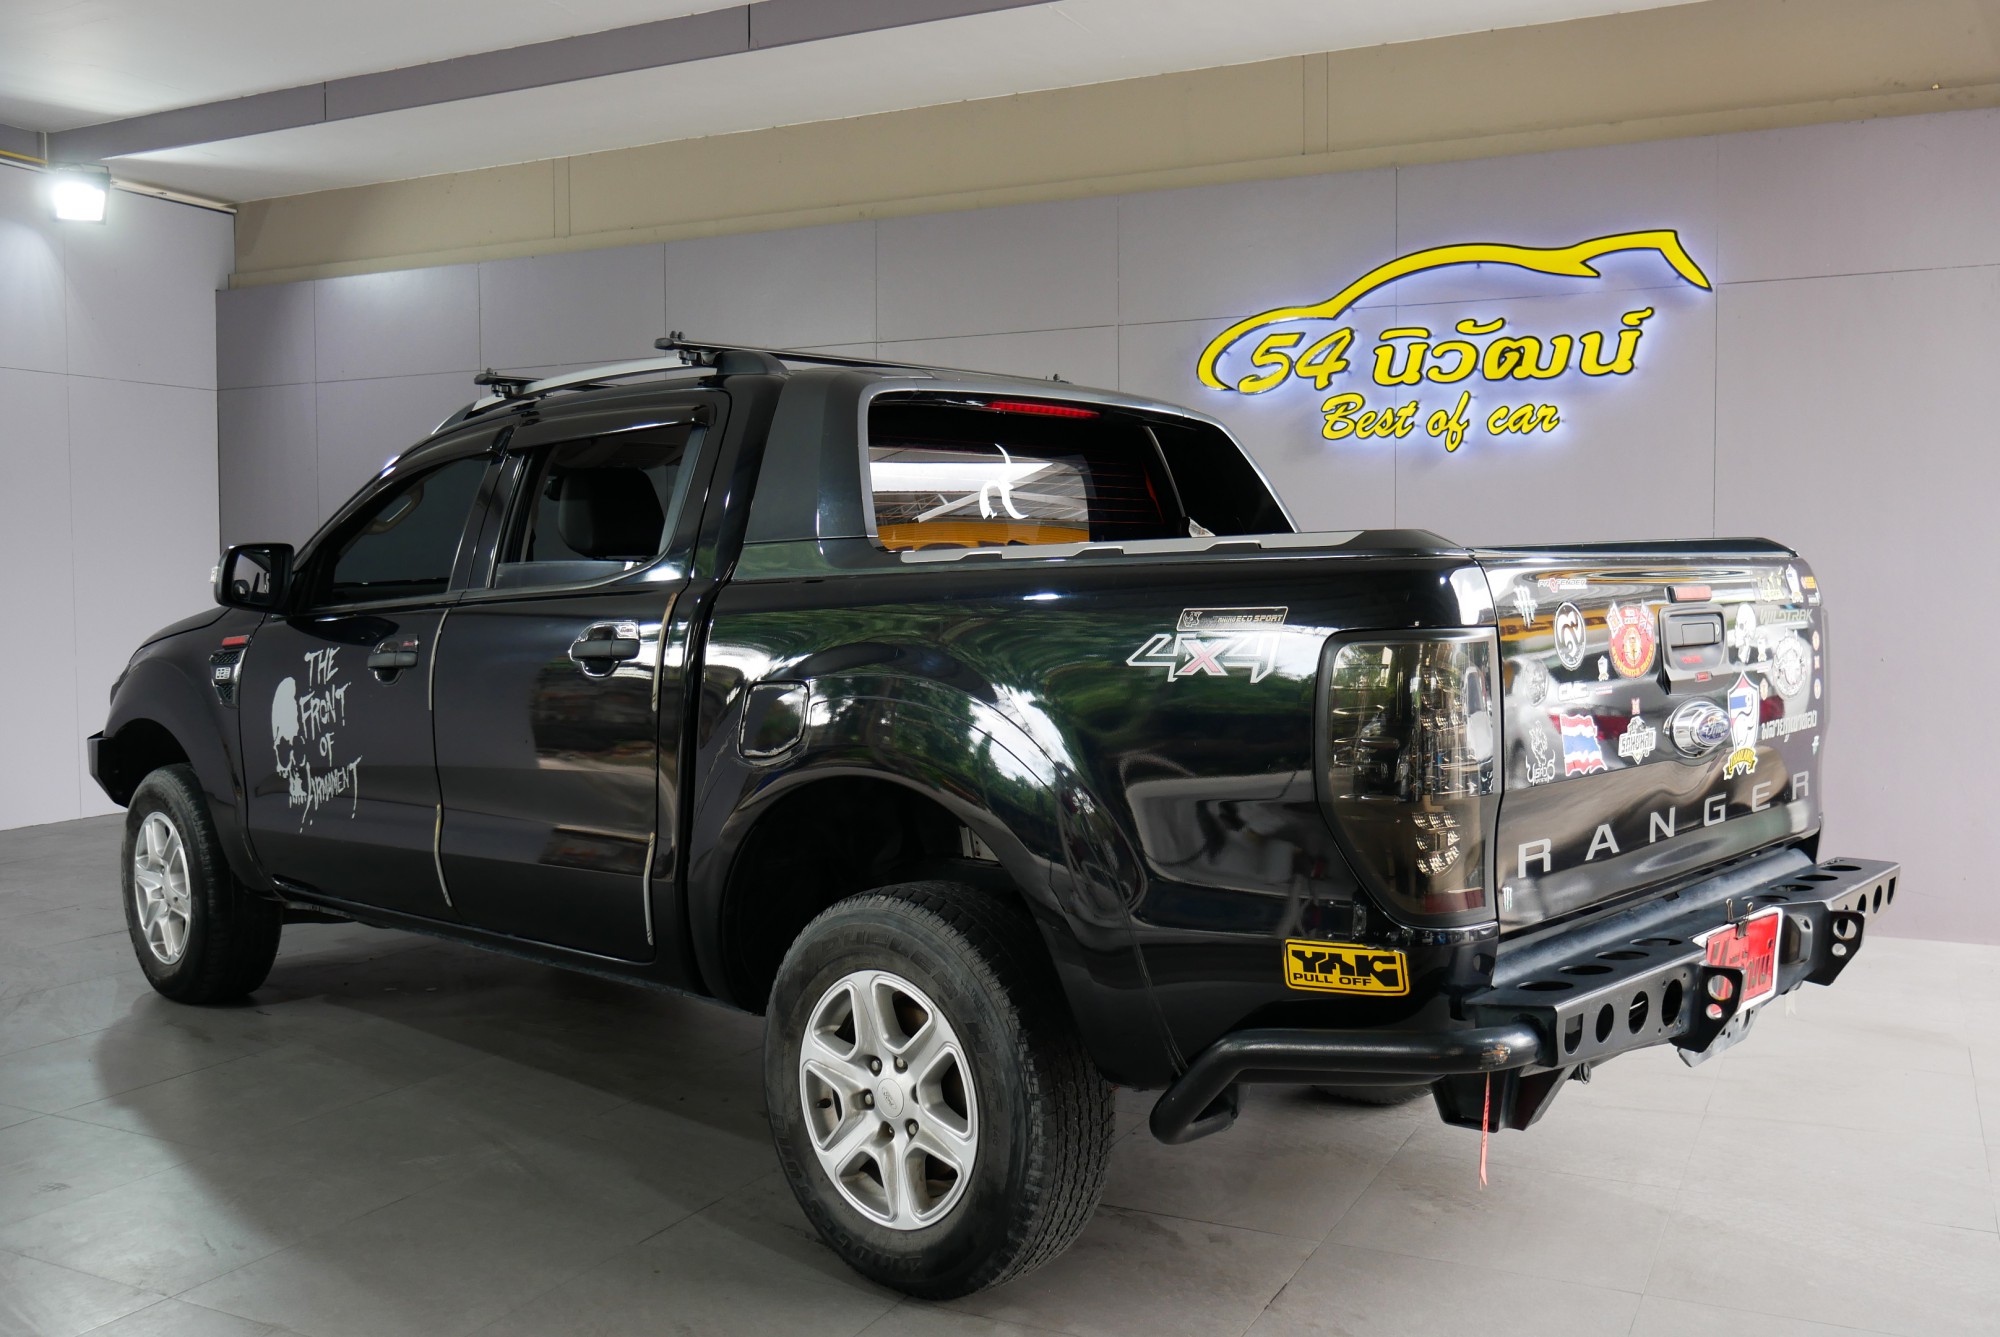 FORD RANGER DOUBLECAB 3.2 WILDTACK 4X4 AT ปี 2014 สีดำ